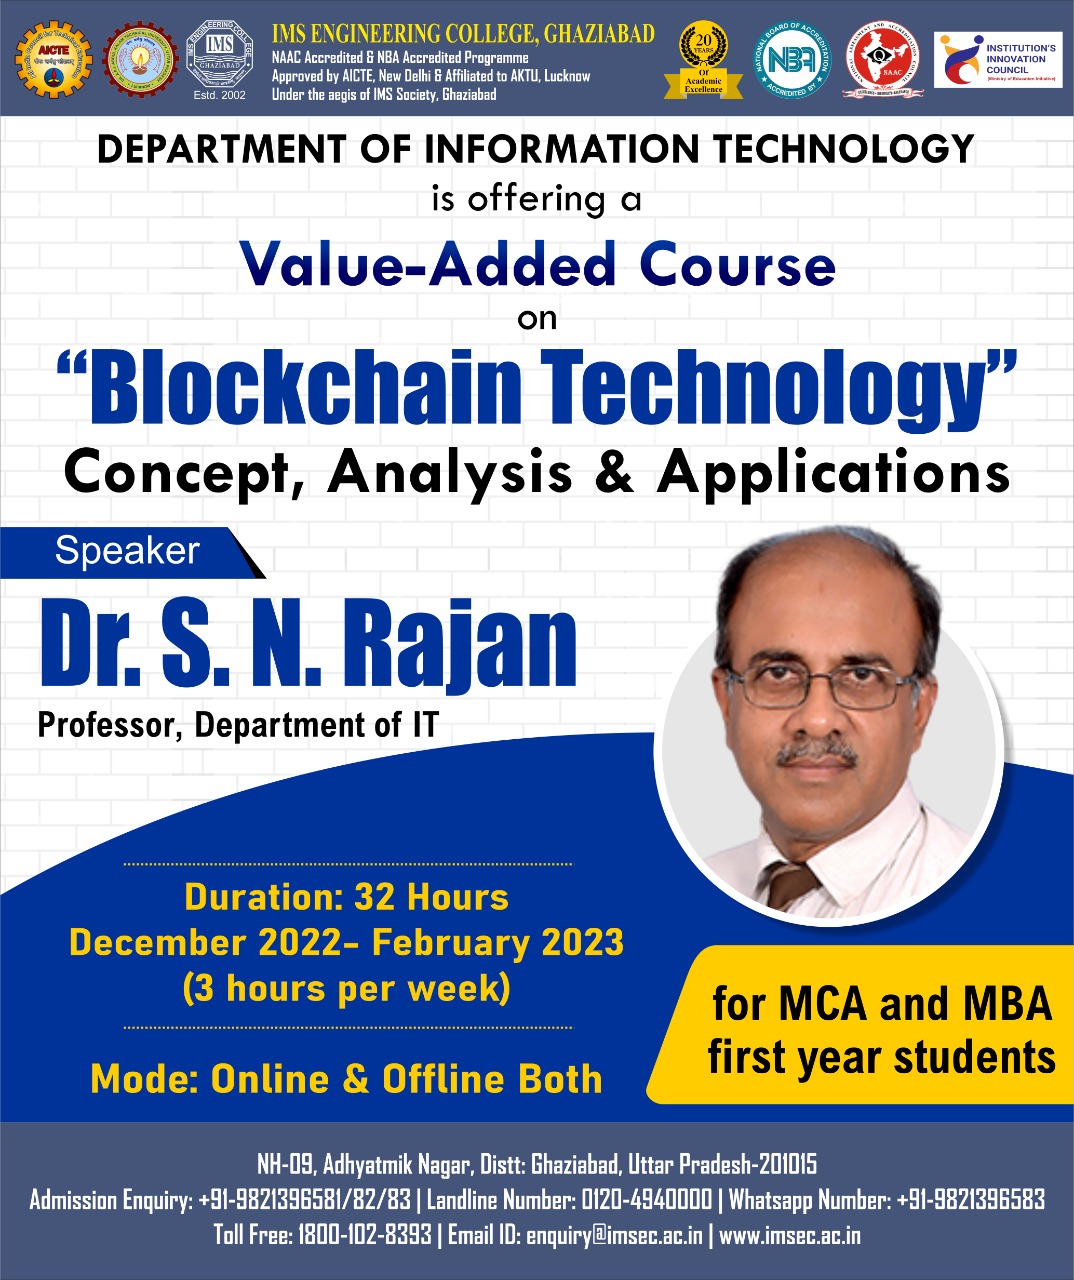 Value-Added course on Blockchain Technology Concept, Analysis & Applications